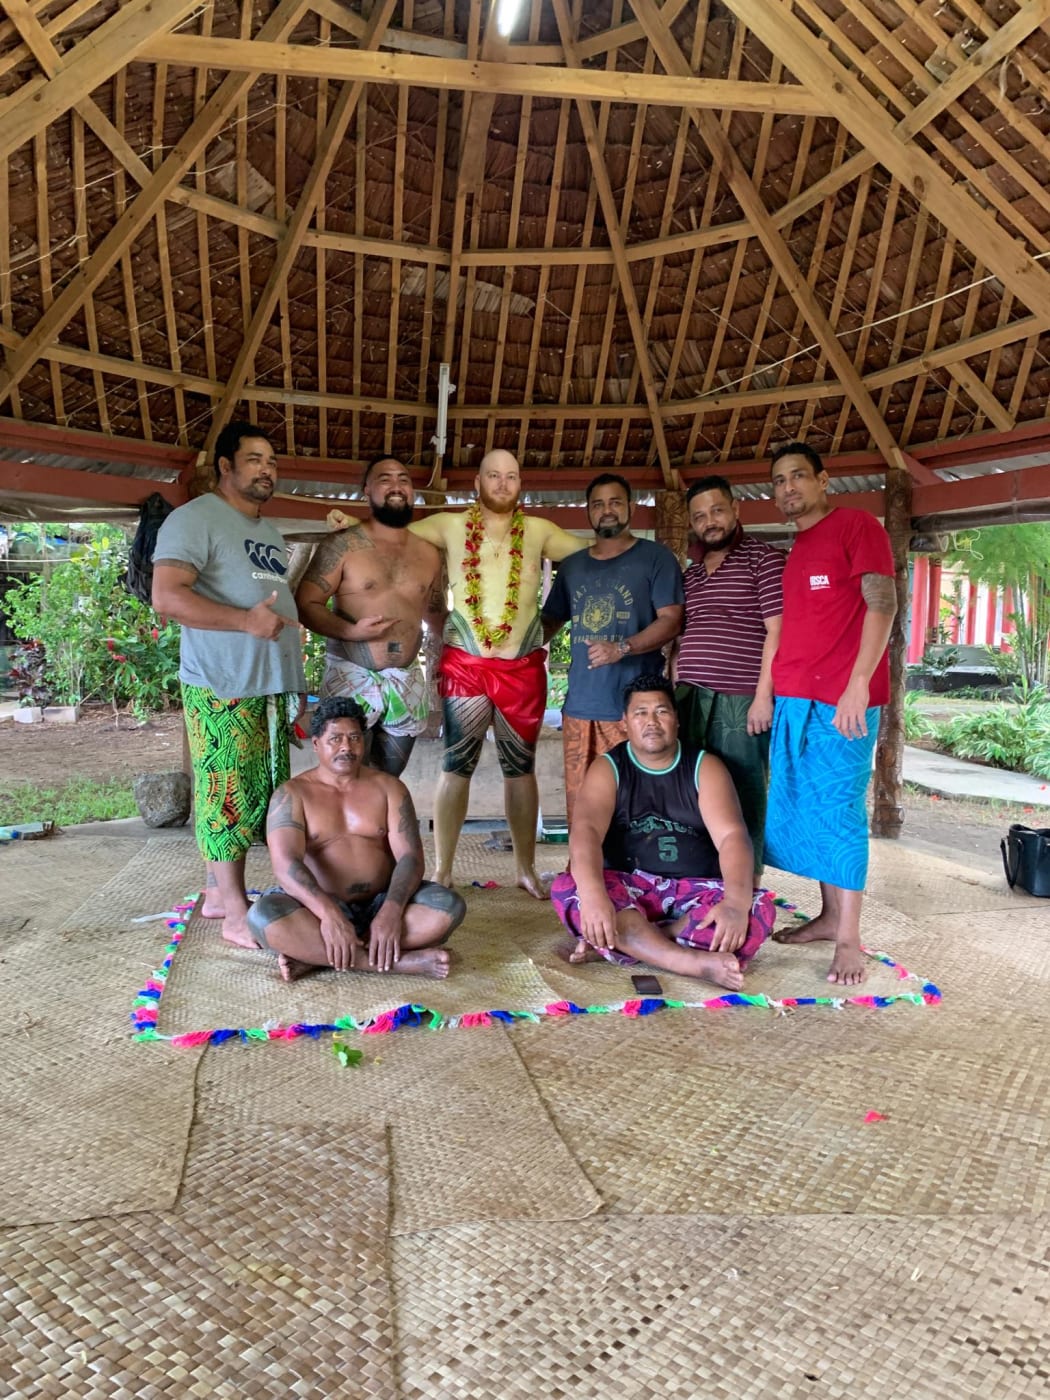 So'omalo Iteni Schwalger in Samoa after getting his pe'a done.